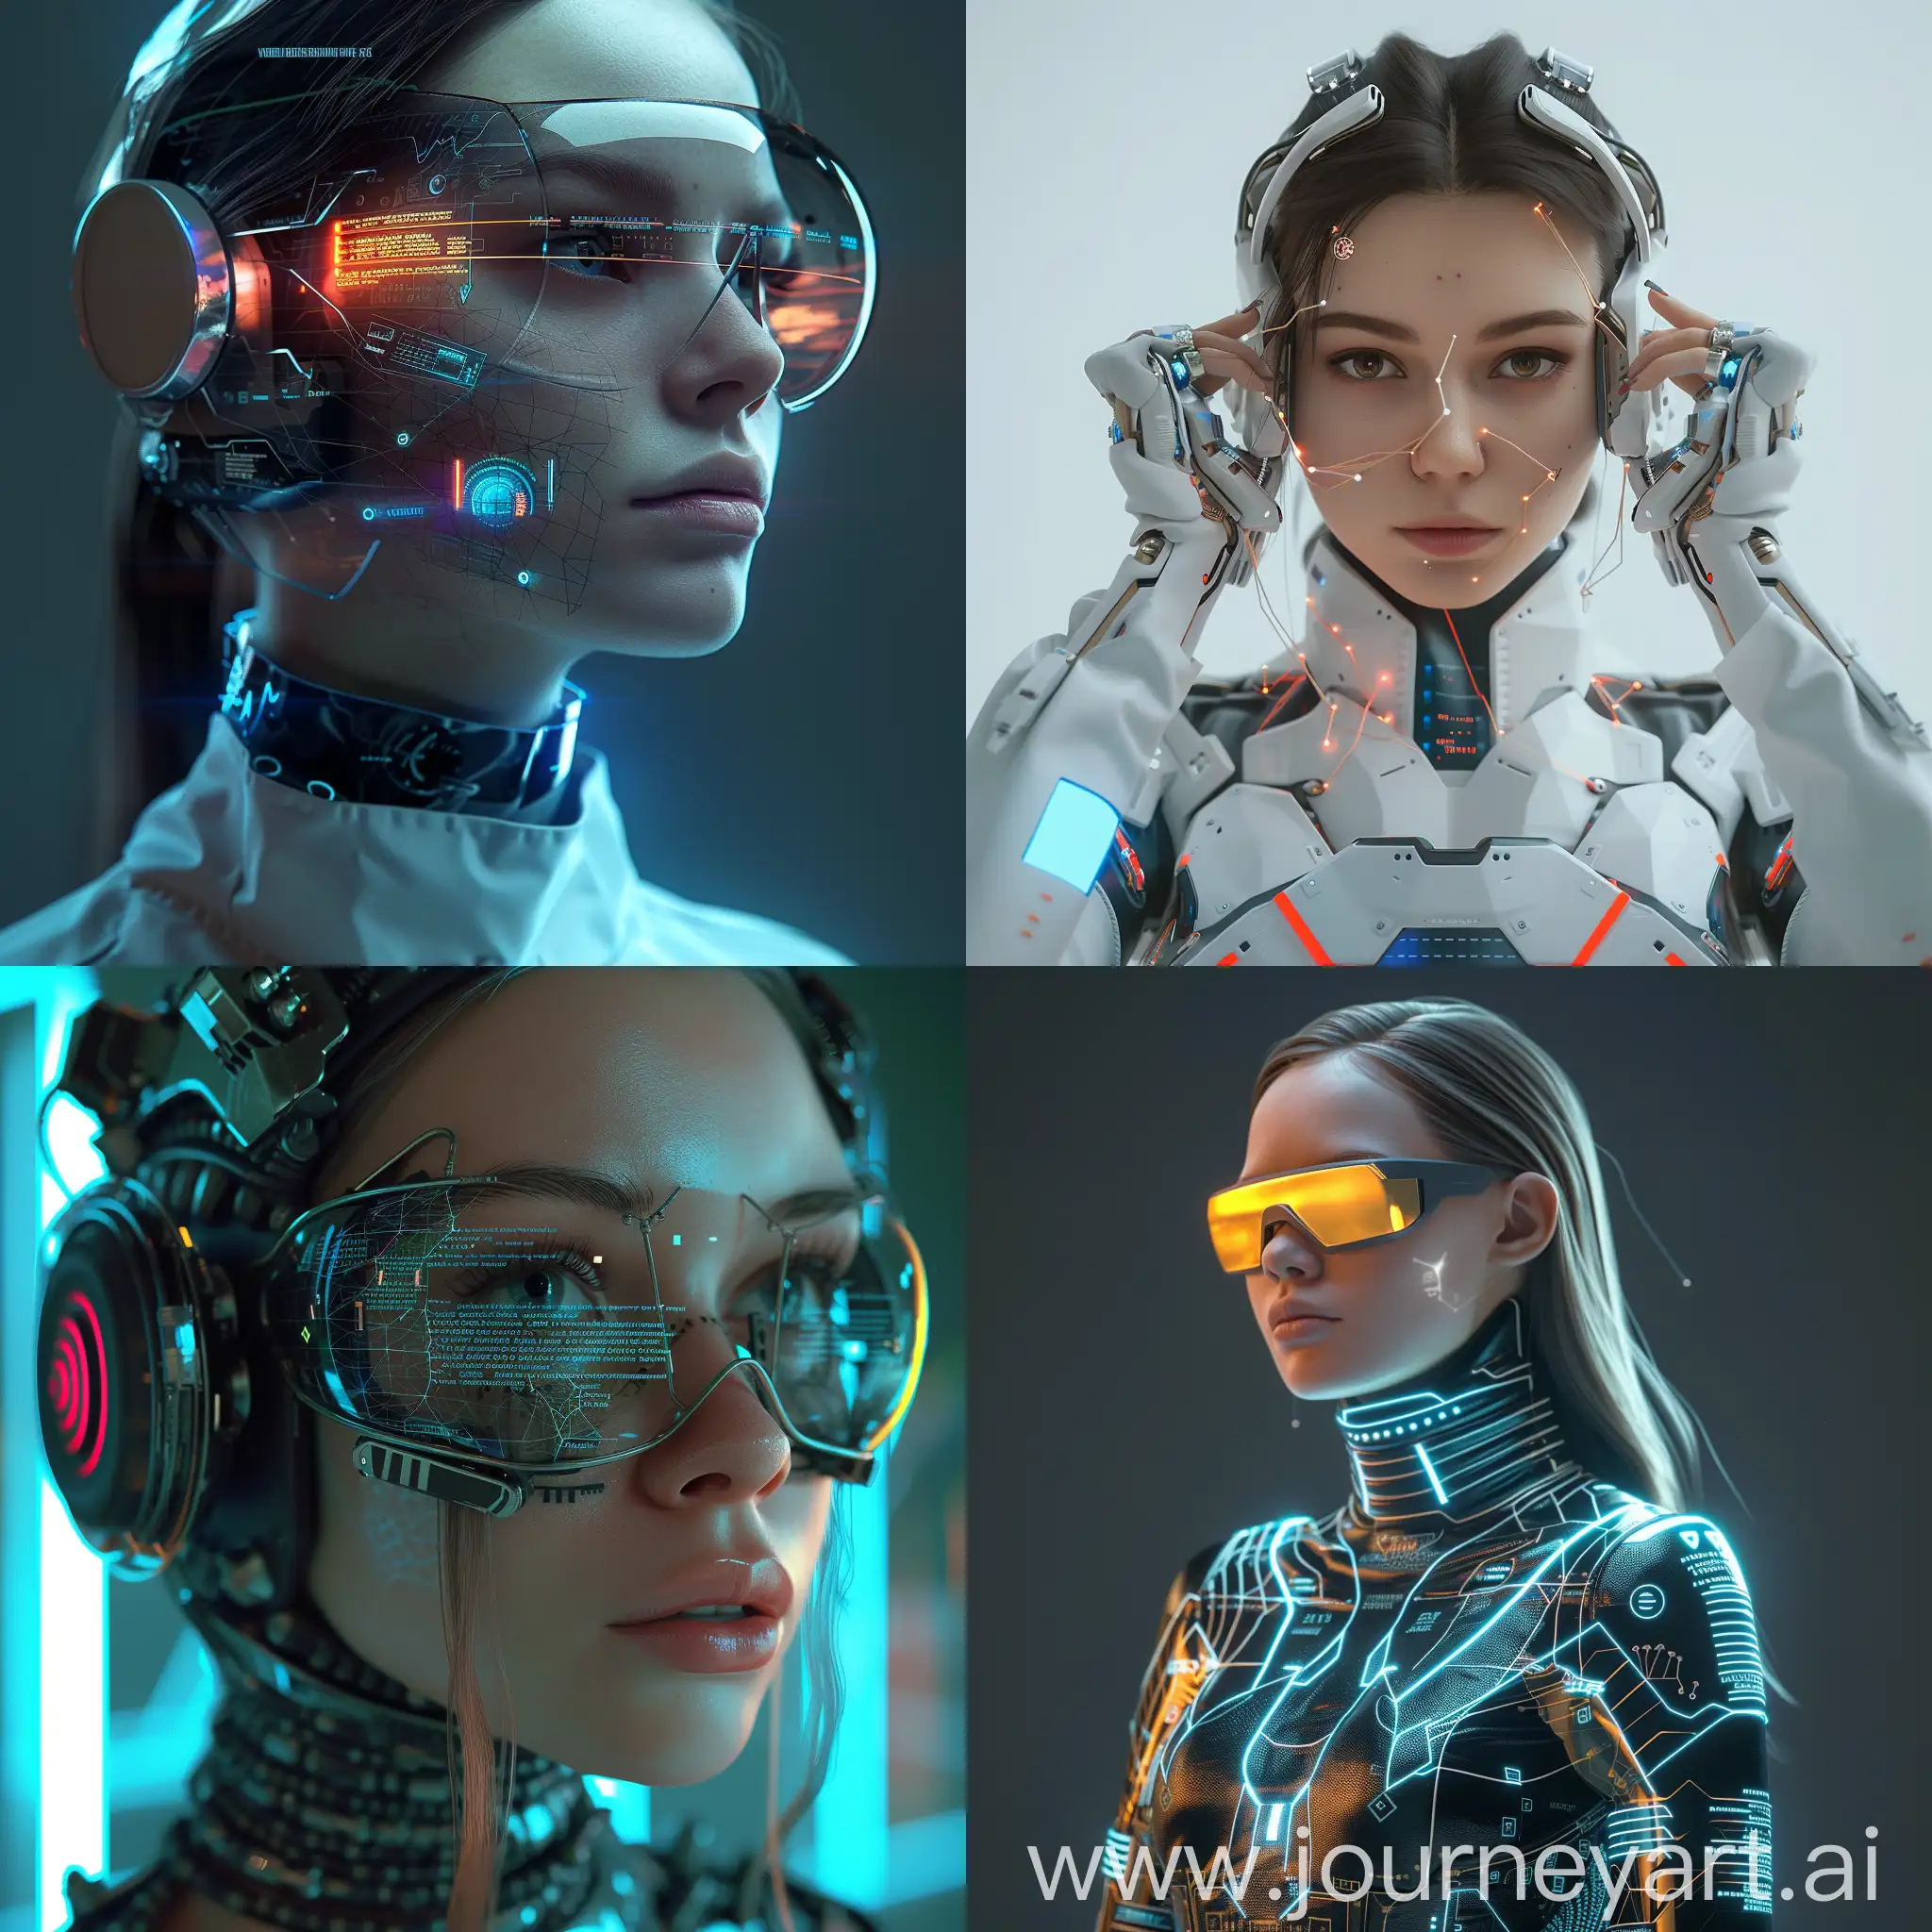 Futuristic russian girl, advanced information age, Neural Enhancement Chip, Advanced Biometric Identification System, Nano-enhanced Blood Cells, Holographic Interface Projectors, Cybernetic Limb Enhancements, Quantum Encryption Module, Synthetic Organs, Energy Harvesting Skin Cells, Augmented Reality Optics, Emotion Regulation Implant, Real-Time Data Analysis Processor, Multilingual Neural Translation Module, Predictive Analytics Engine, Virtual Assistant Integration, Blockchain-based Identity Management System, Cybersecurity Firewall, Distributed Computing Node, Personalized Medicine Algorithm, Ethical AI Framework, Neural Network Optimization Module, Bioluminescent Skin Panels, Nano-fiber Hair Extensions, Modular Fashion Accessories, Augmented Reality Fashion Overlay, Dynamic Camouflage Clothing, Integrated Environmental Sensors, Magnetic Levitation Footwear. Carbon Nanotube Reinforced Armor, Hyperloop-Compatible Travel Gear, Solar-Powered Fashion Accessories, Holographic Communication Interface, Biometric Access Wearables, Augmented Reality Smart Glasses, 3D Printed Fashion Accessories, Quantum Encryption Jewelry, Neural Interface Headset, Drone Companion Integration, Gesture-Controlled Wearable Interfaces, Artificial Intelligence Fashion Advisor, Blockchain Authenticity Verification Tags, unreal engine 5 --stylize 1000